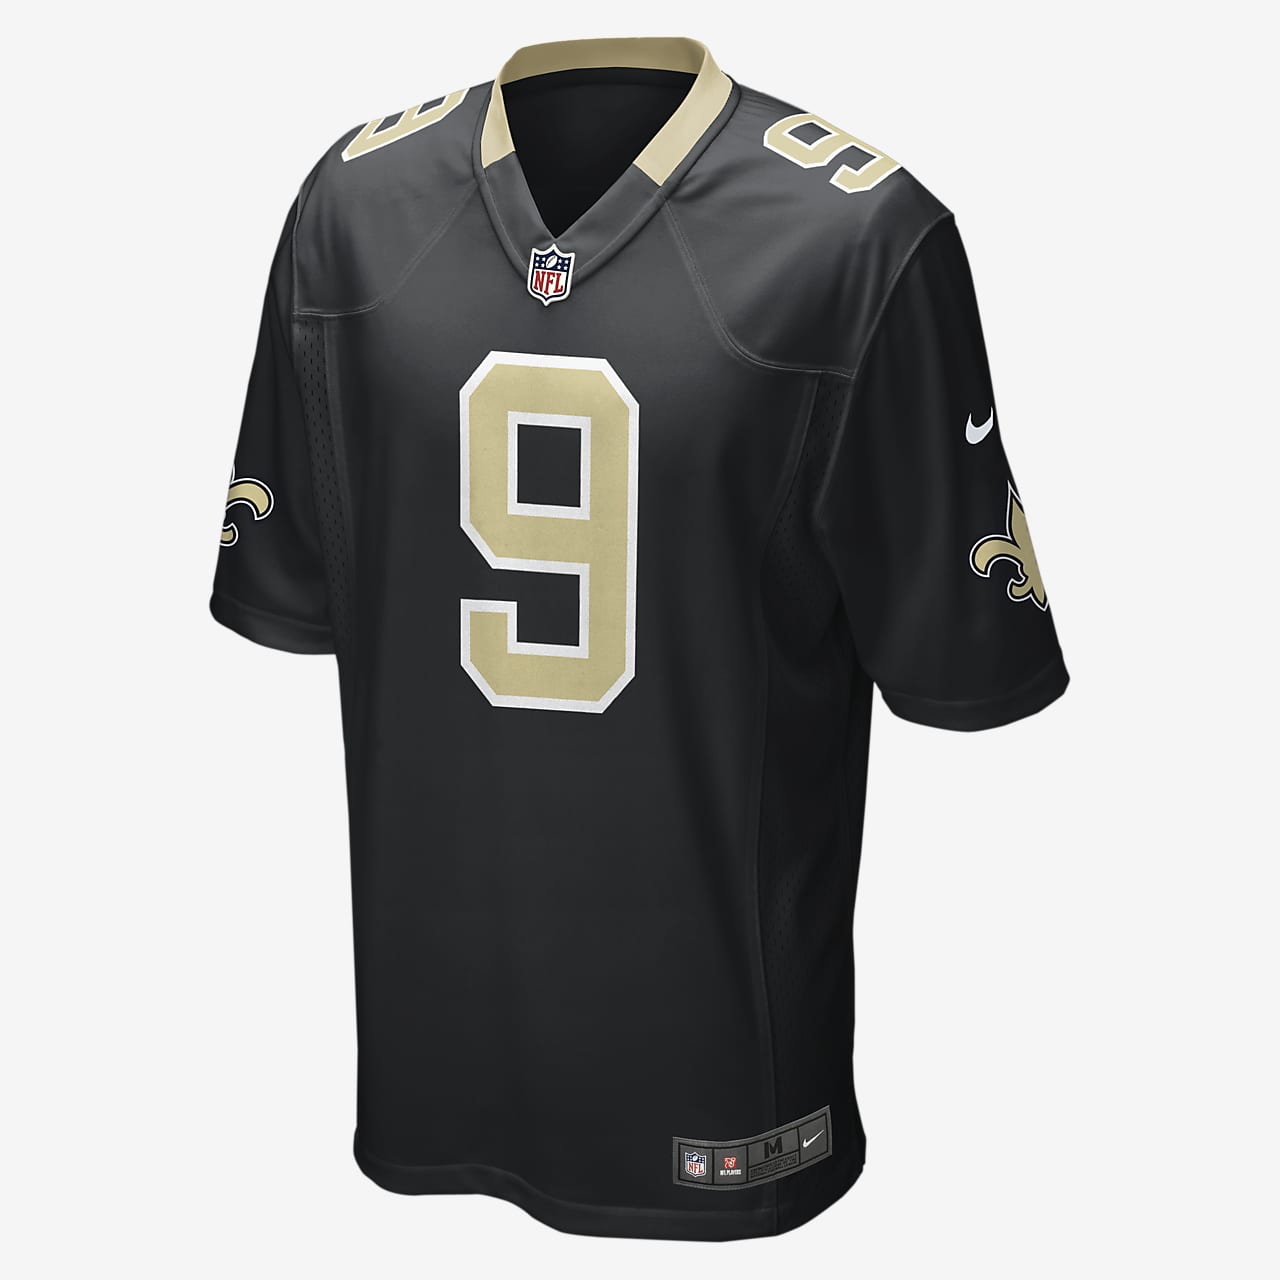 NFL New Orleans Saints (Drew Brees) Men's American Football Home Game Jersey